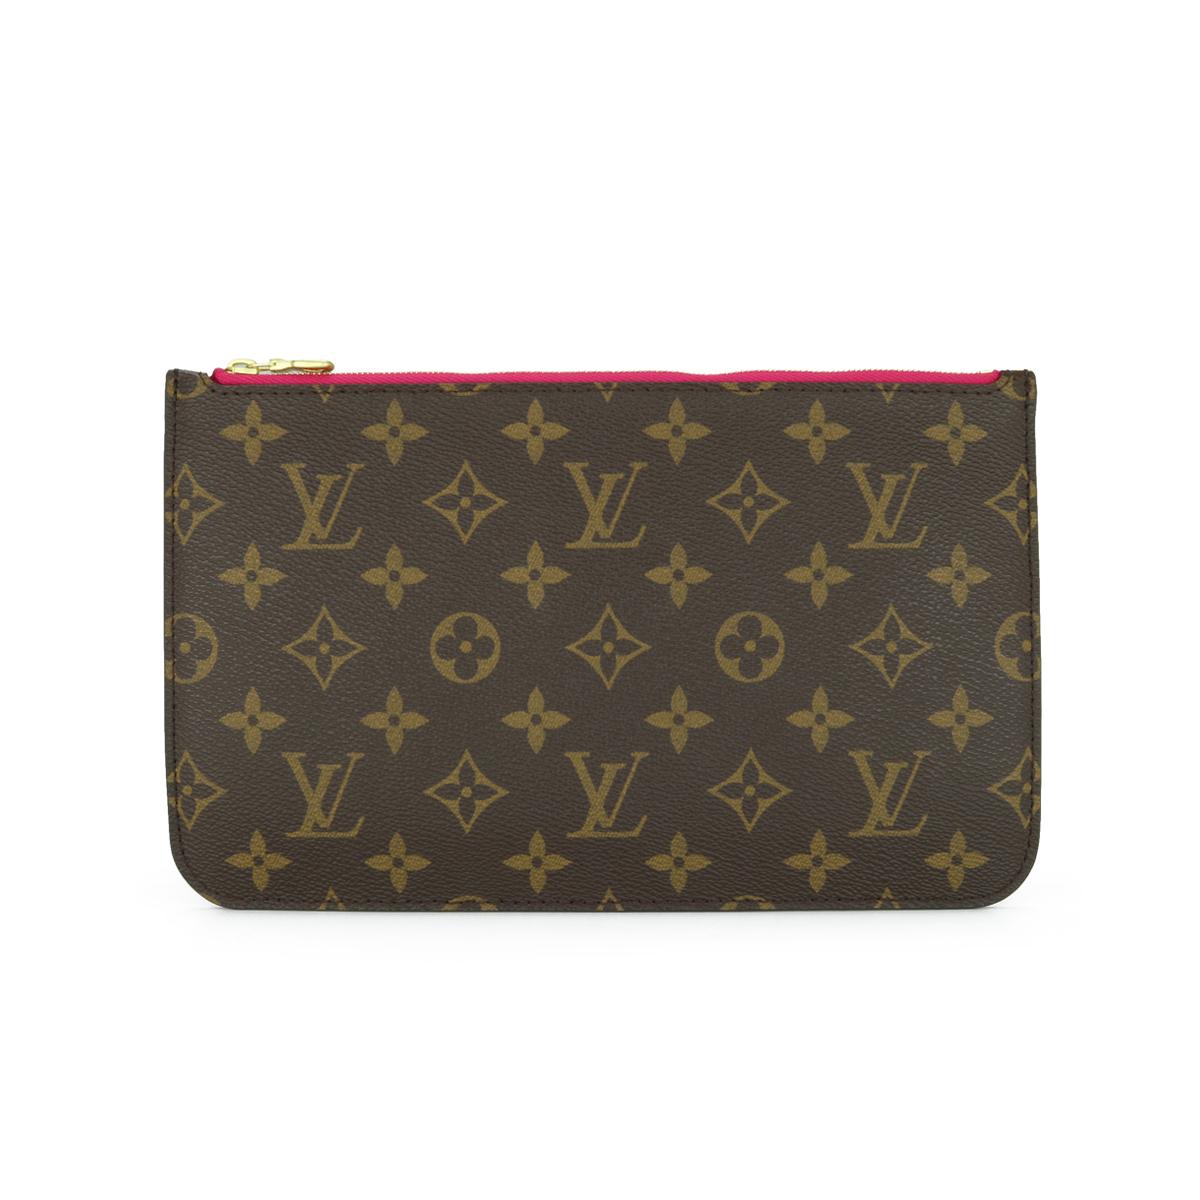 Louis Vuitton Neverfull MM Zip Pochette Pouch in Monogram with Pivoine Interior 2018.

This pouch is in excellent condition. 

- Exterior Condition: Excellent condition. The outside of the pouch shows minor signs of wear. There is inking wear to the